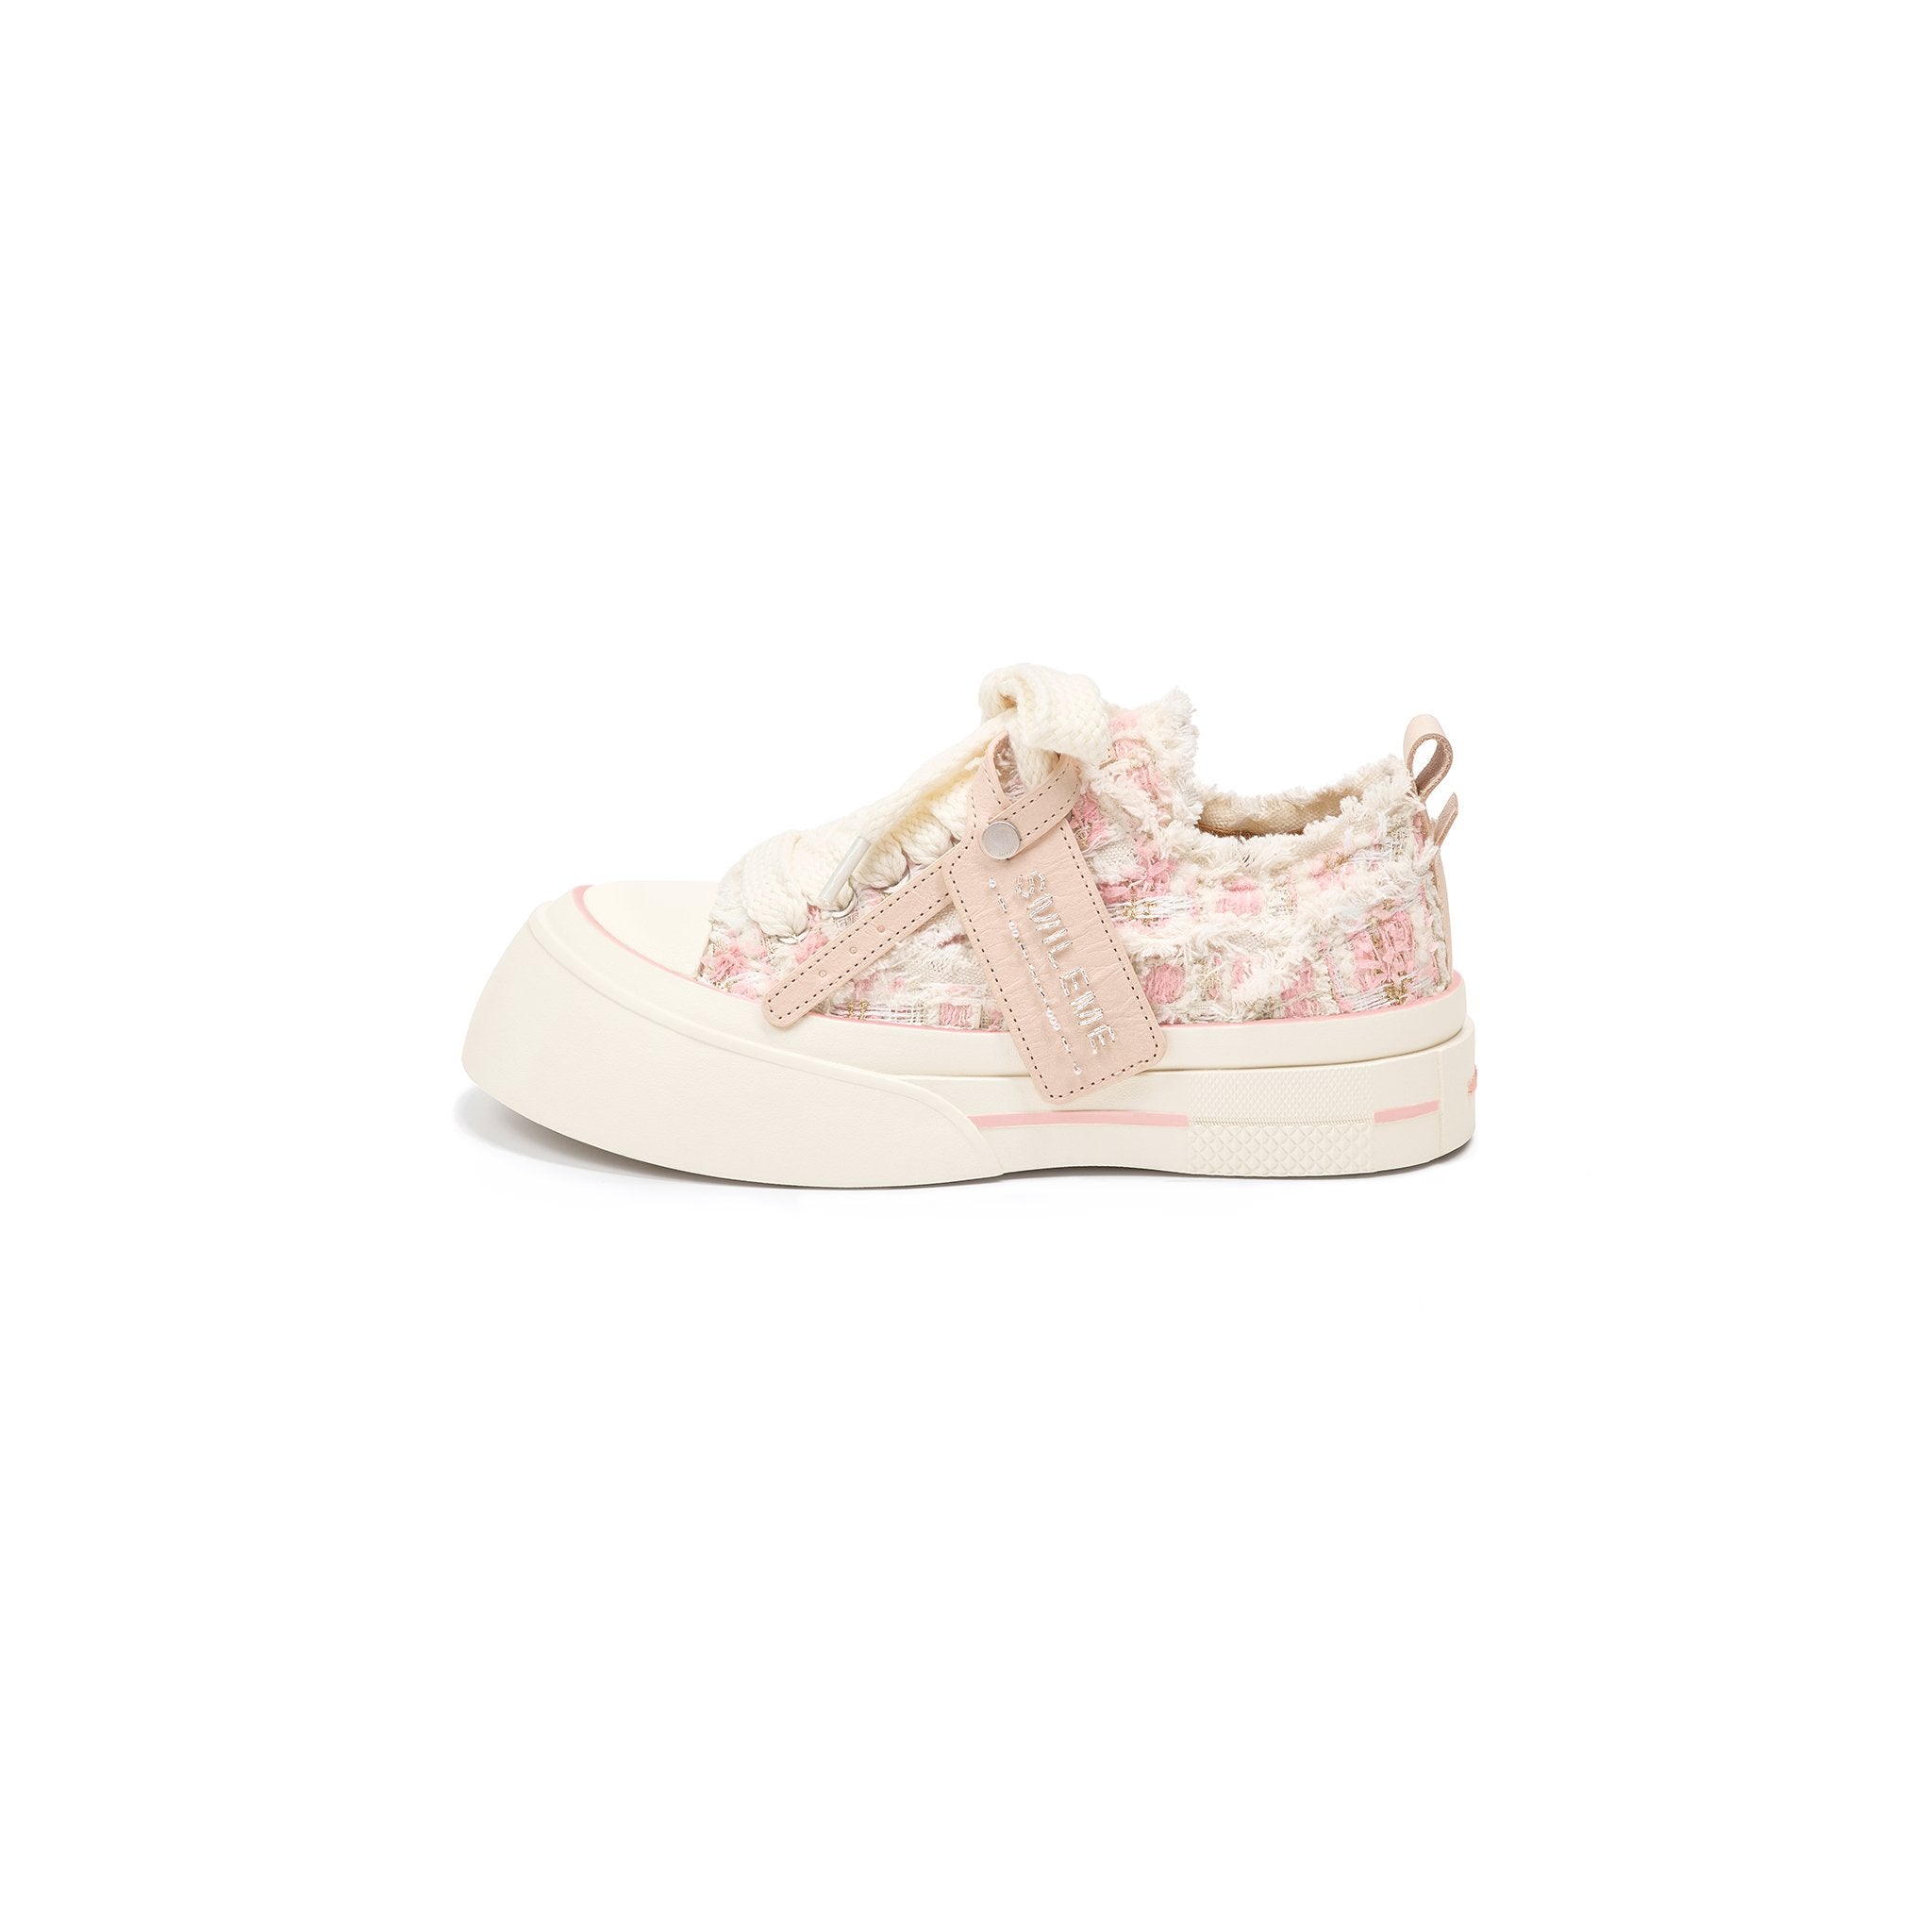 Smileme Future Star Pink Canvas Shoes | MADA IN CHINA